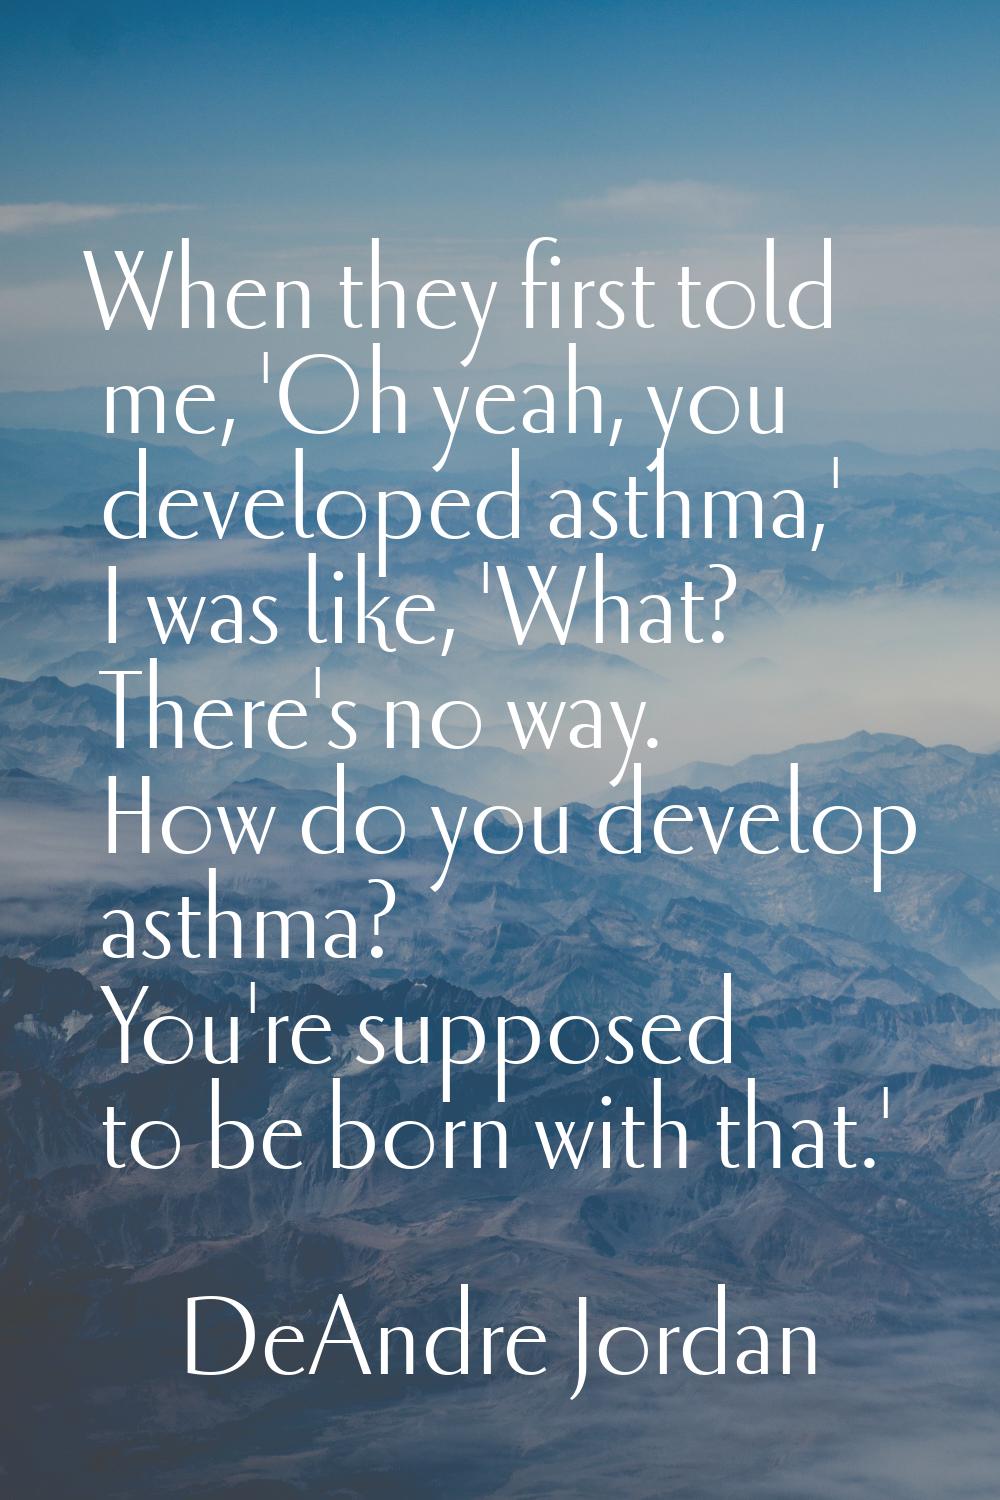 When they first told me, 'Oh yeah, you developed asthma,' I was like, 'What? There's no way. How do